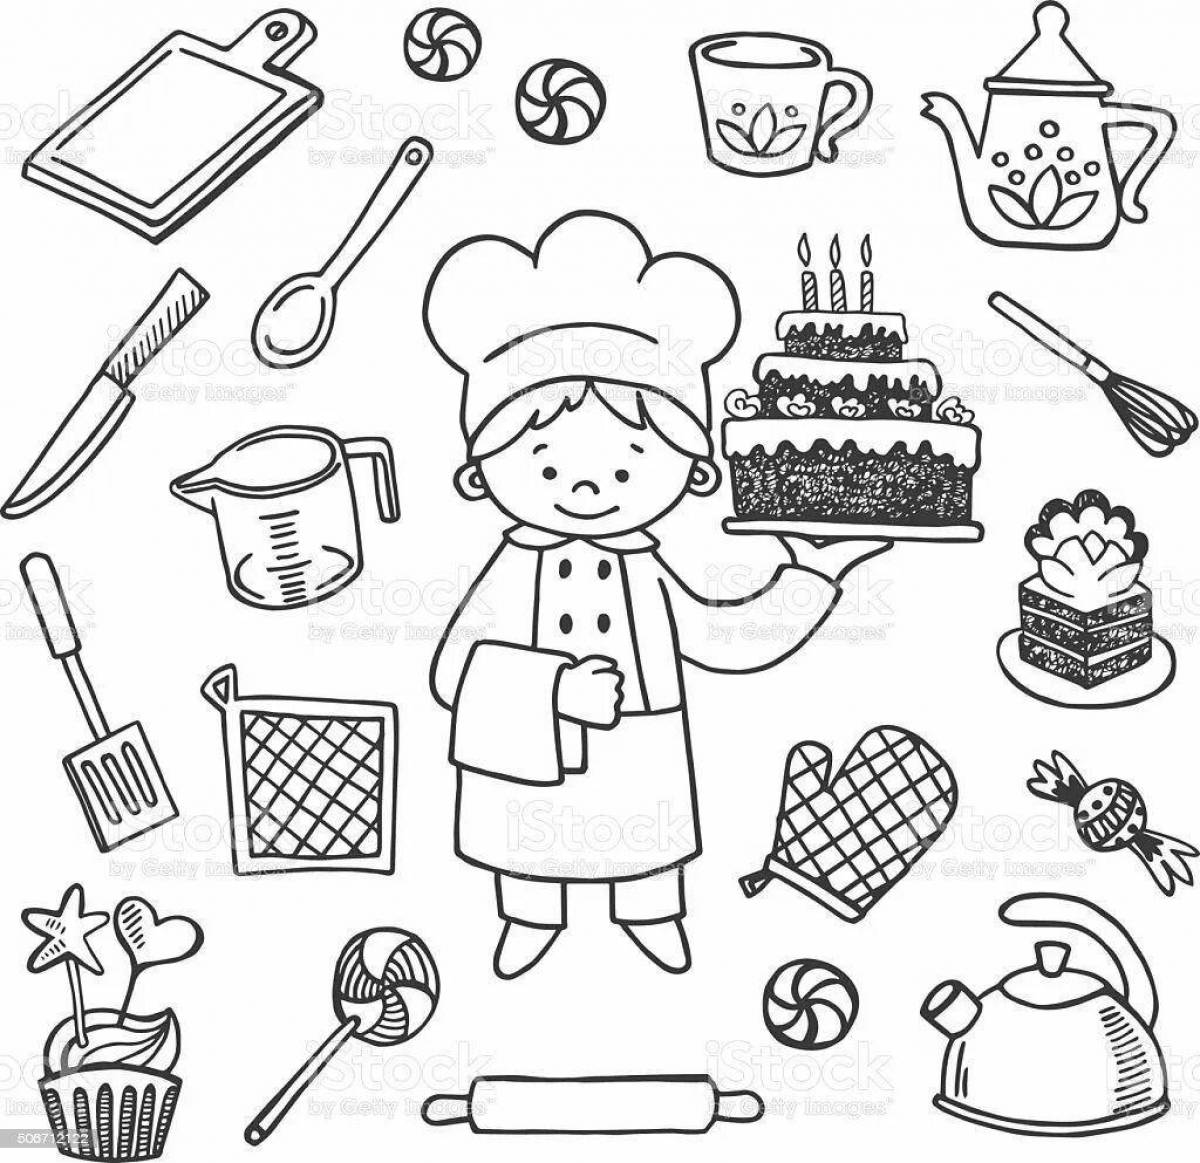 Lovely cook tools coloring book